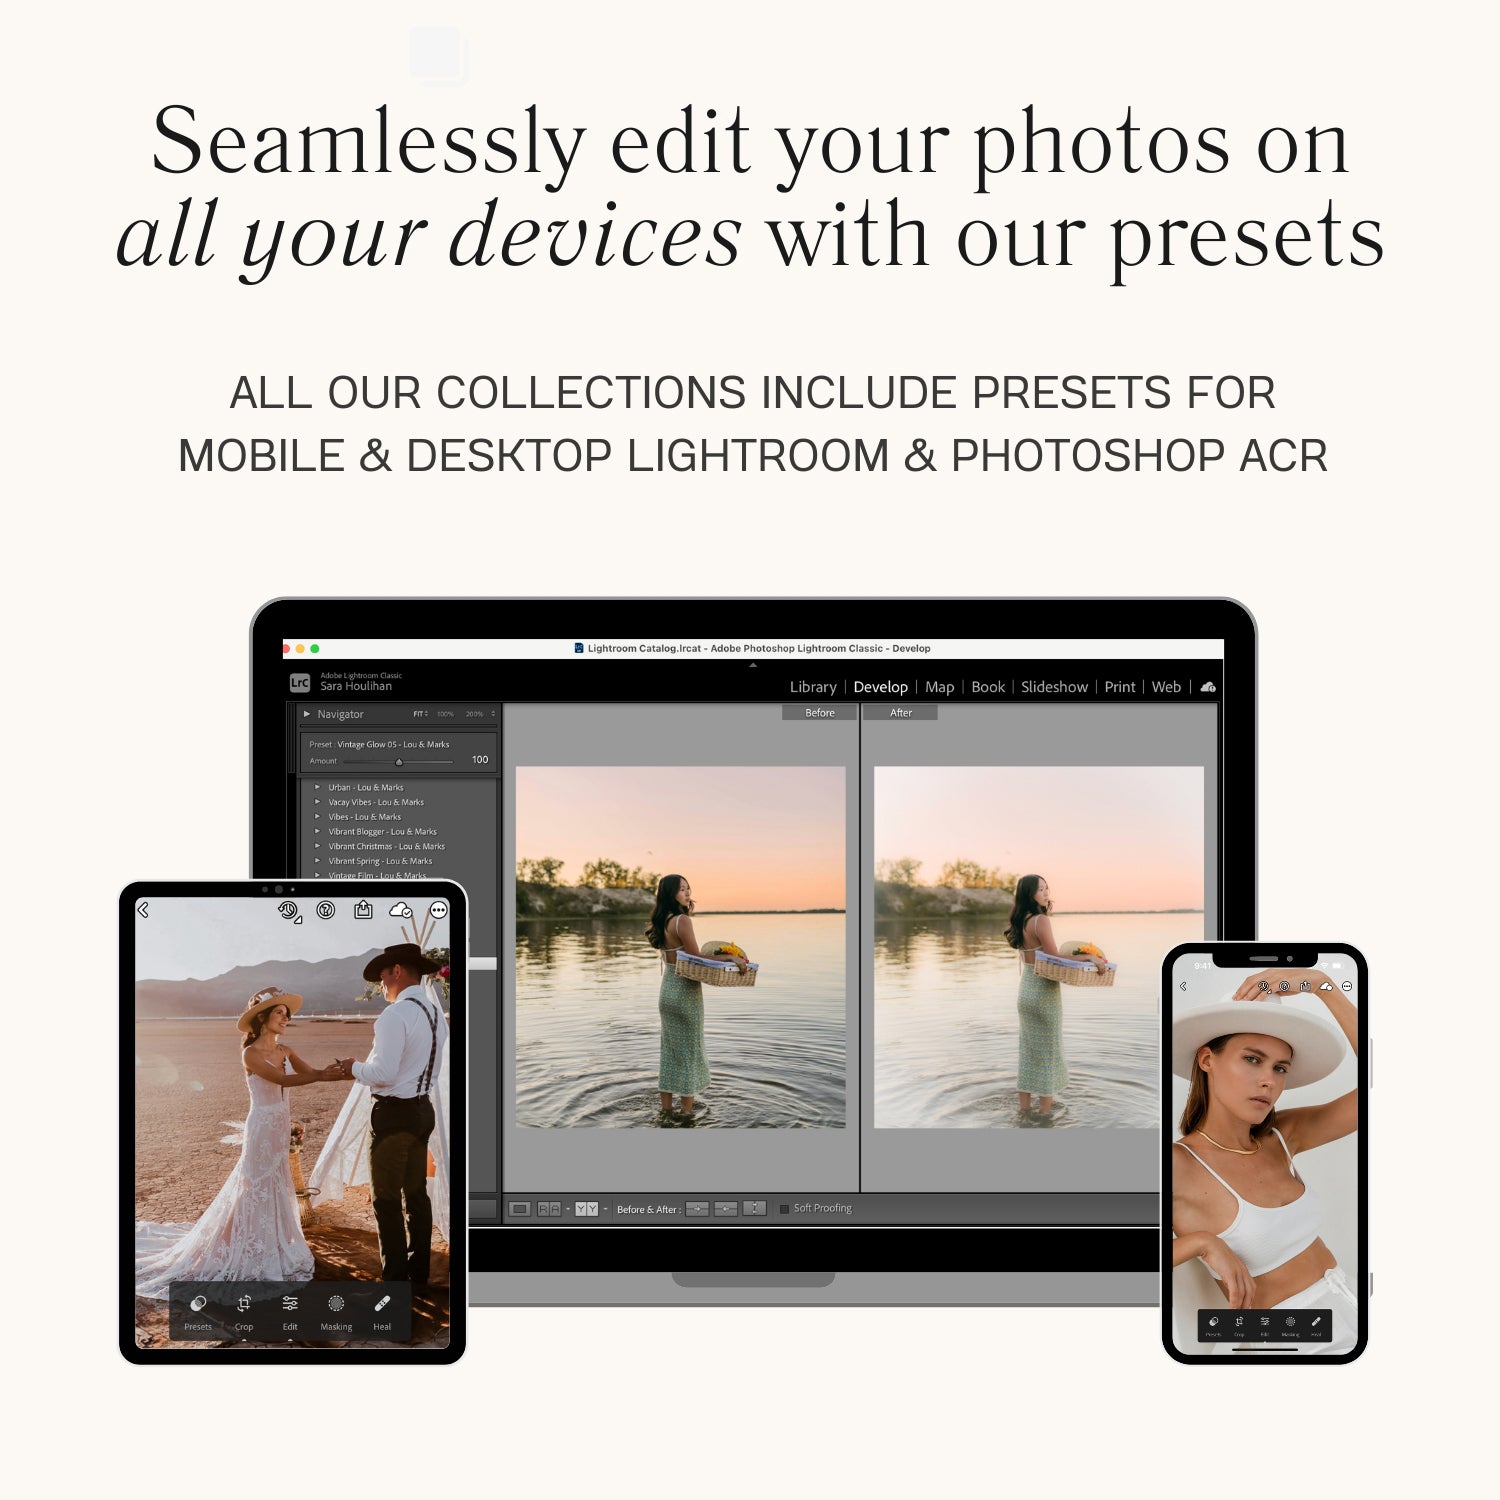 Adobe Cali Summer Lightroom Presets The Best Photo Editing Preset Filters For Summer And Travel Colorful Photos With Lightroom Mobile And Desktop For Photographers and Instagram Influencers By Lou And Marks Presets